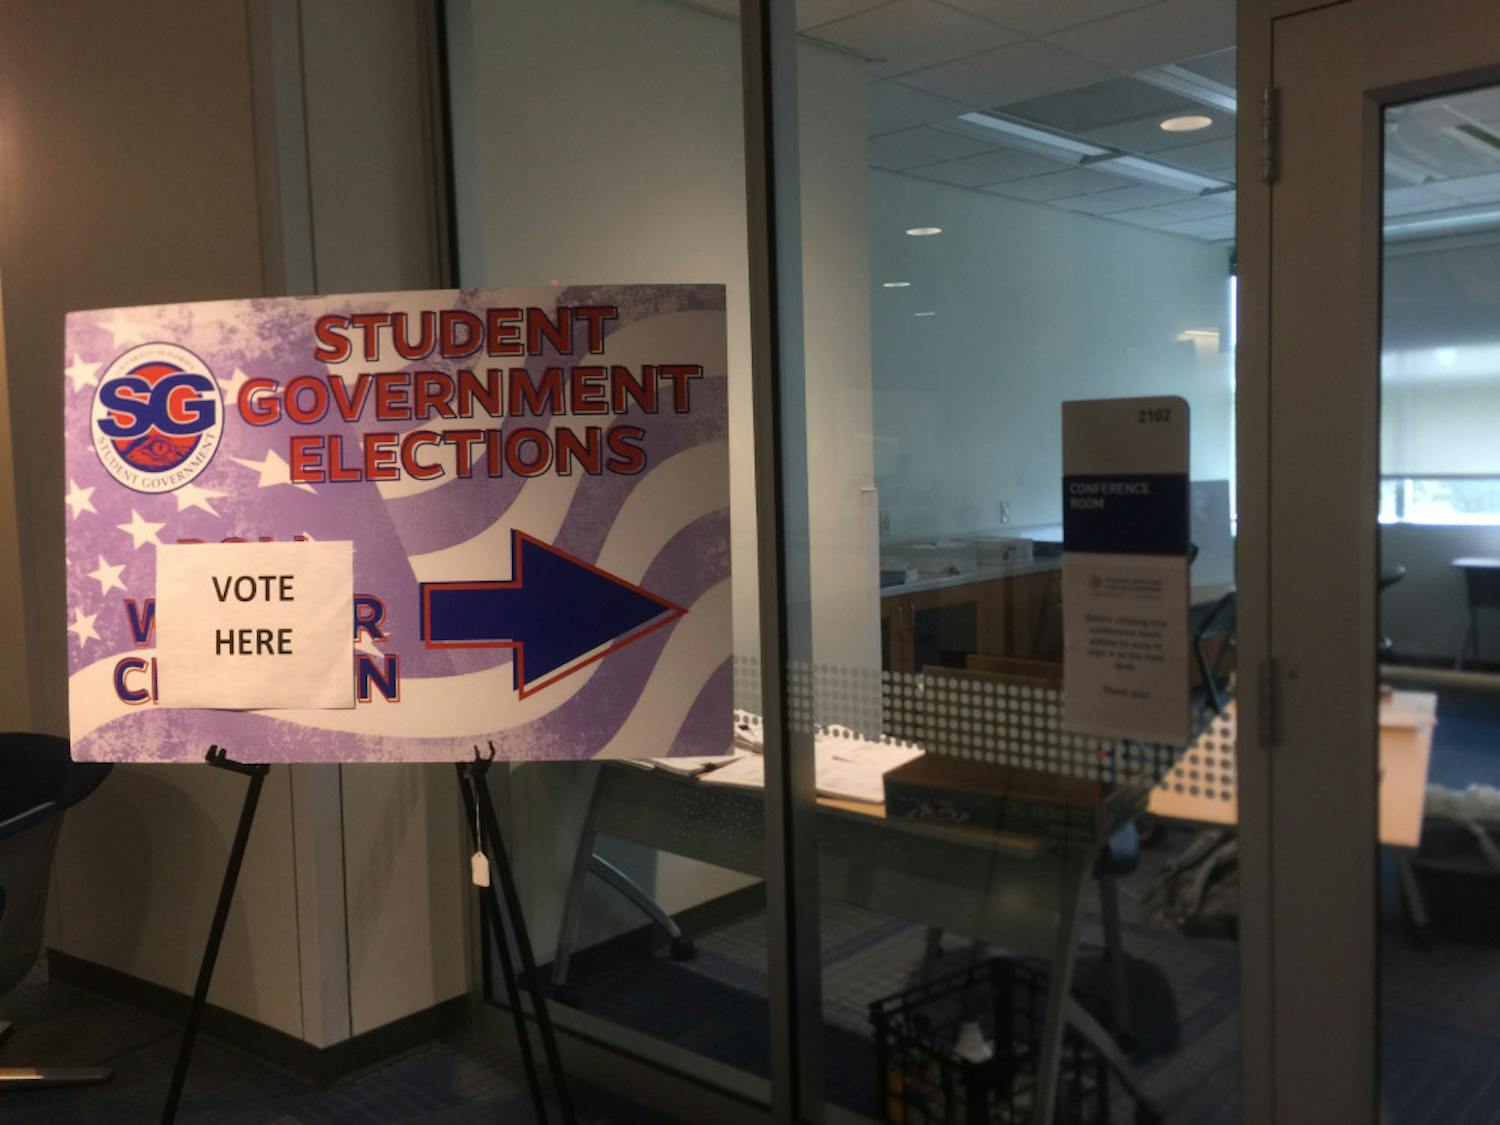 Early voting for Student Government elections began Monday, Sept. 28 in the Reitz Union.